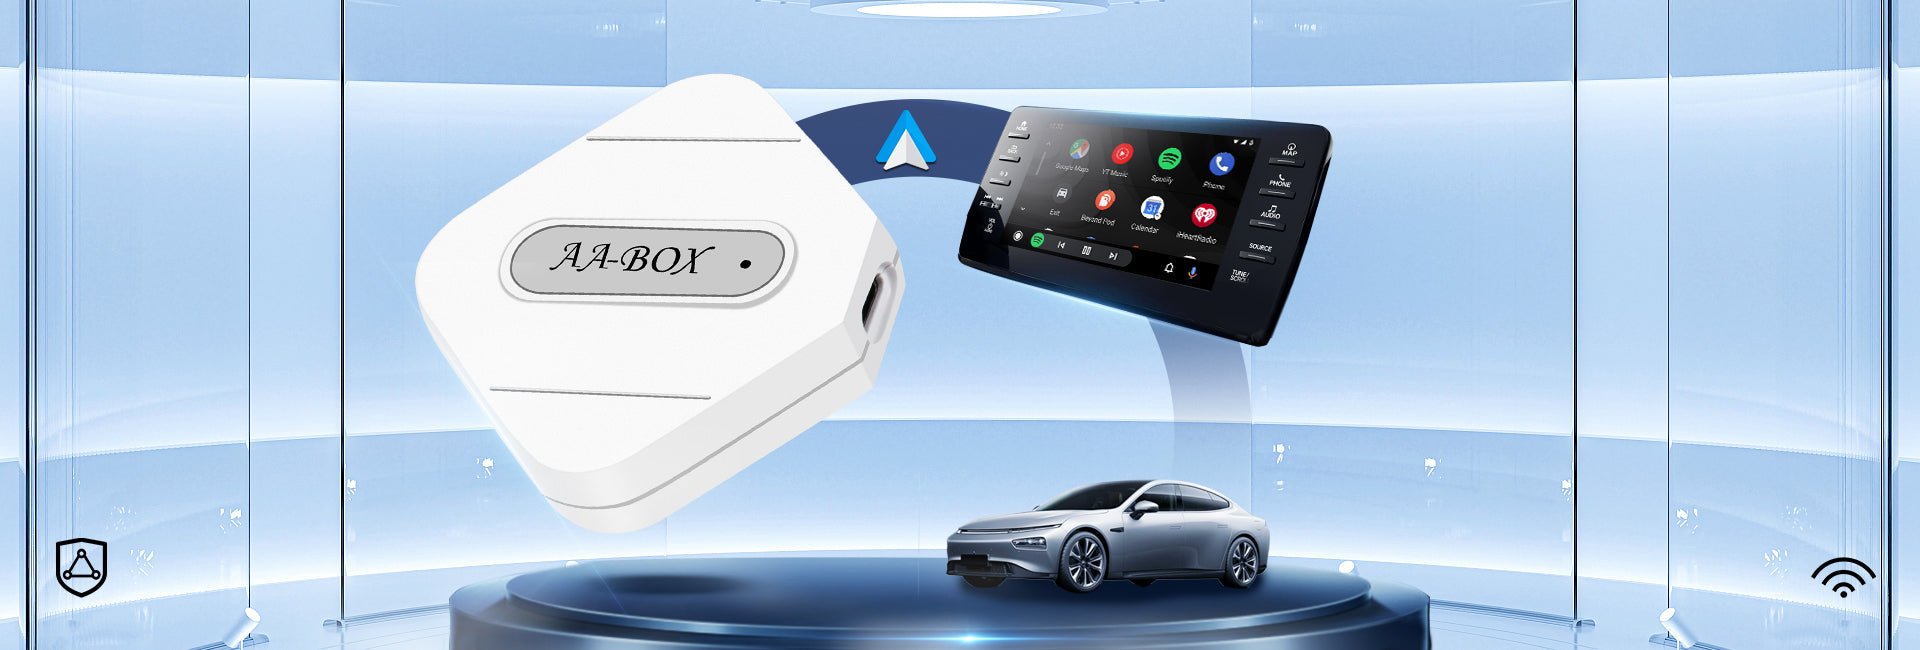 PODOFO Wired to Wireless Android Auto Adapter Fastest and Most Compact Wireless Android Auto Adapter, Plug&Play No Delay